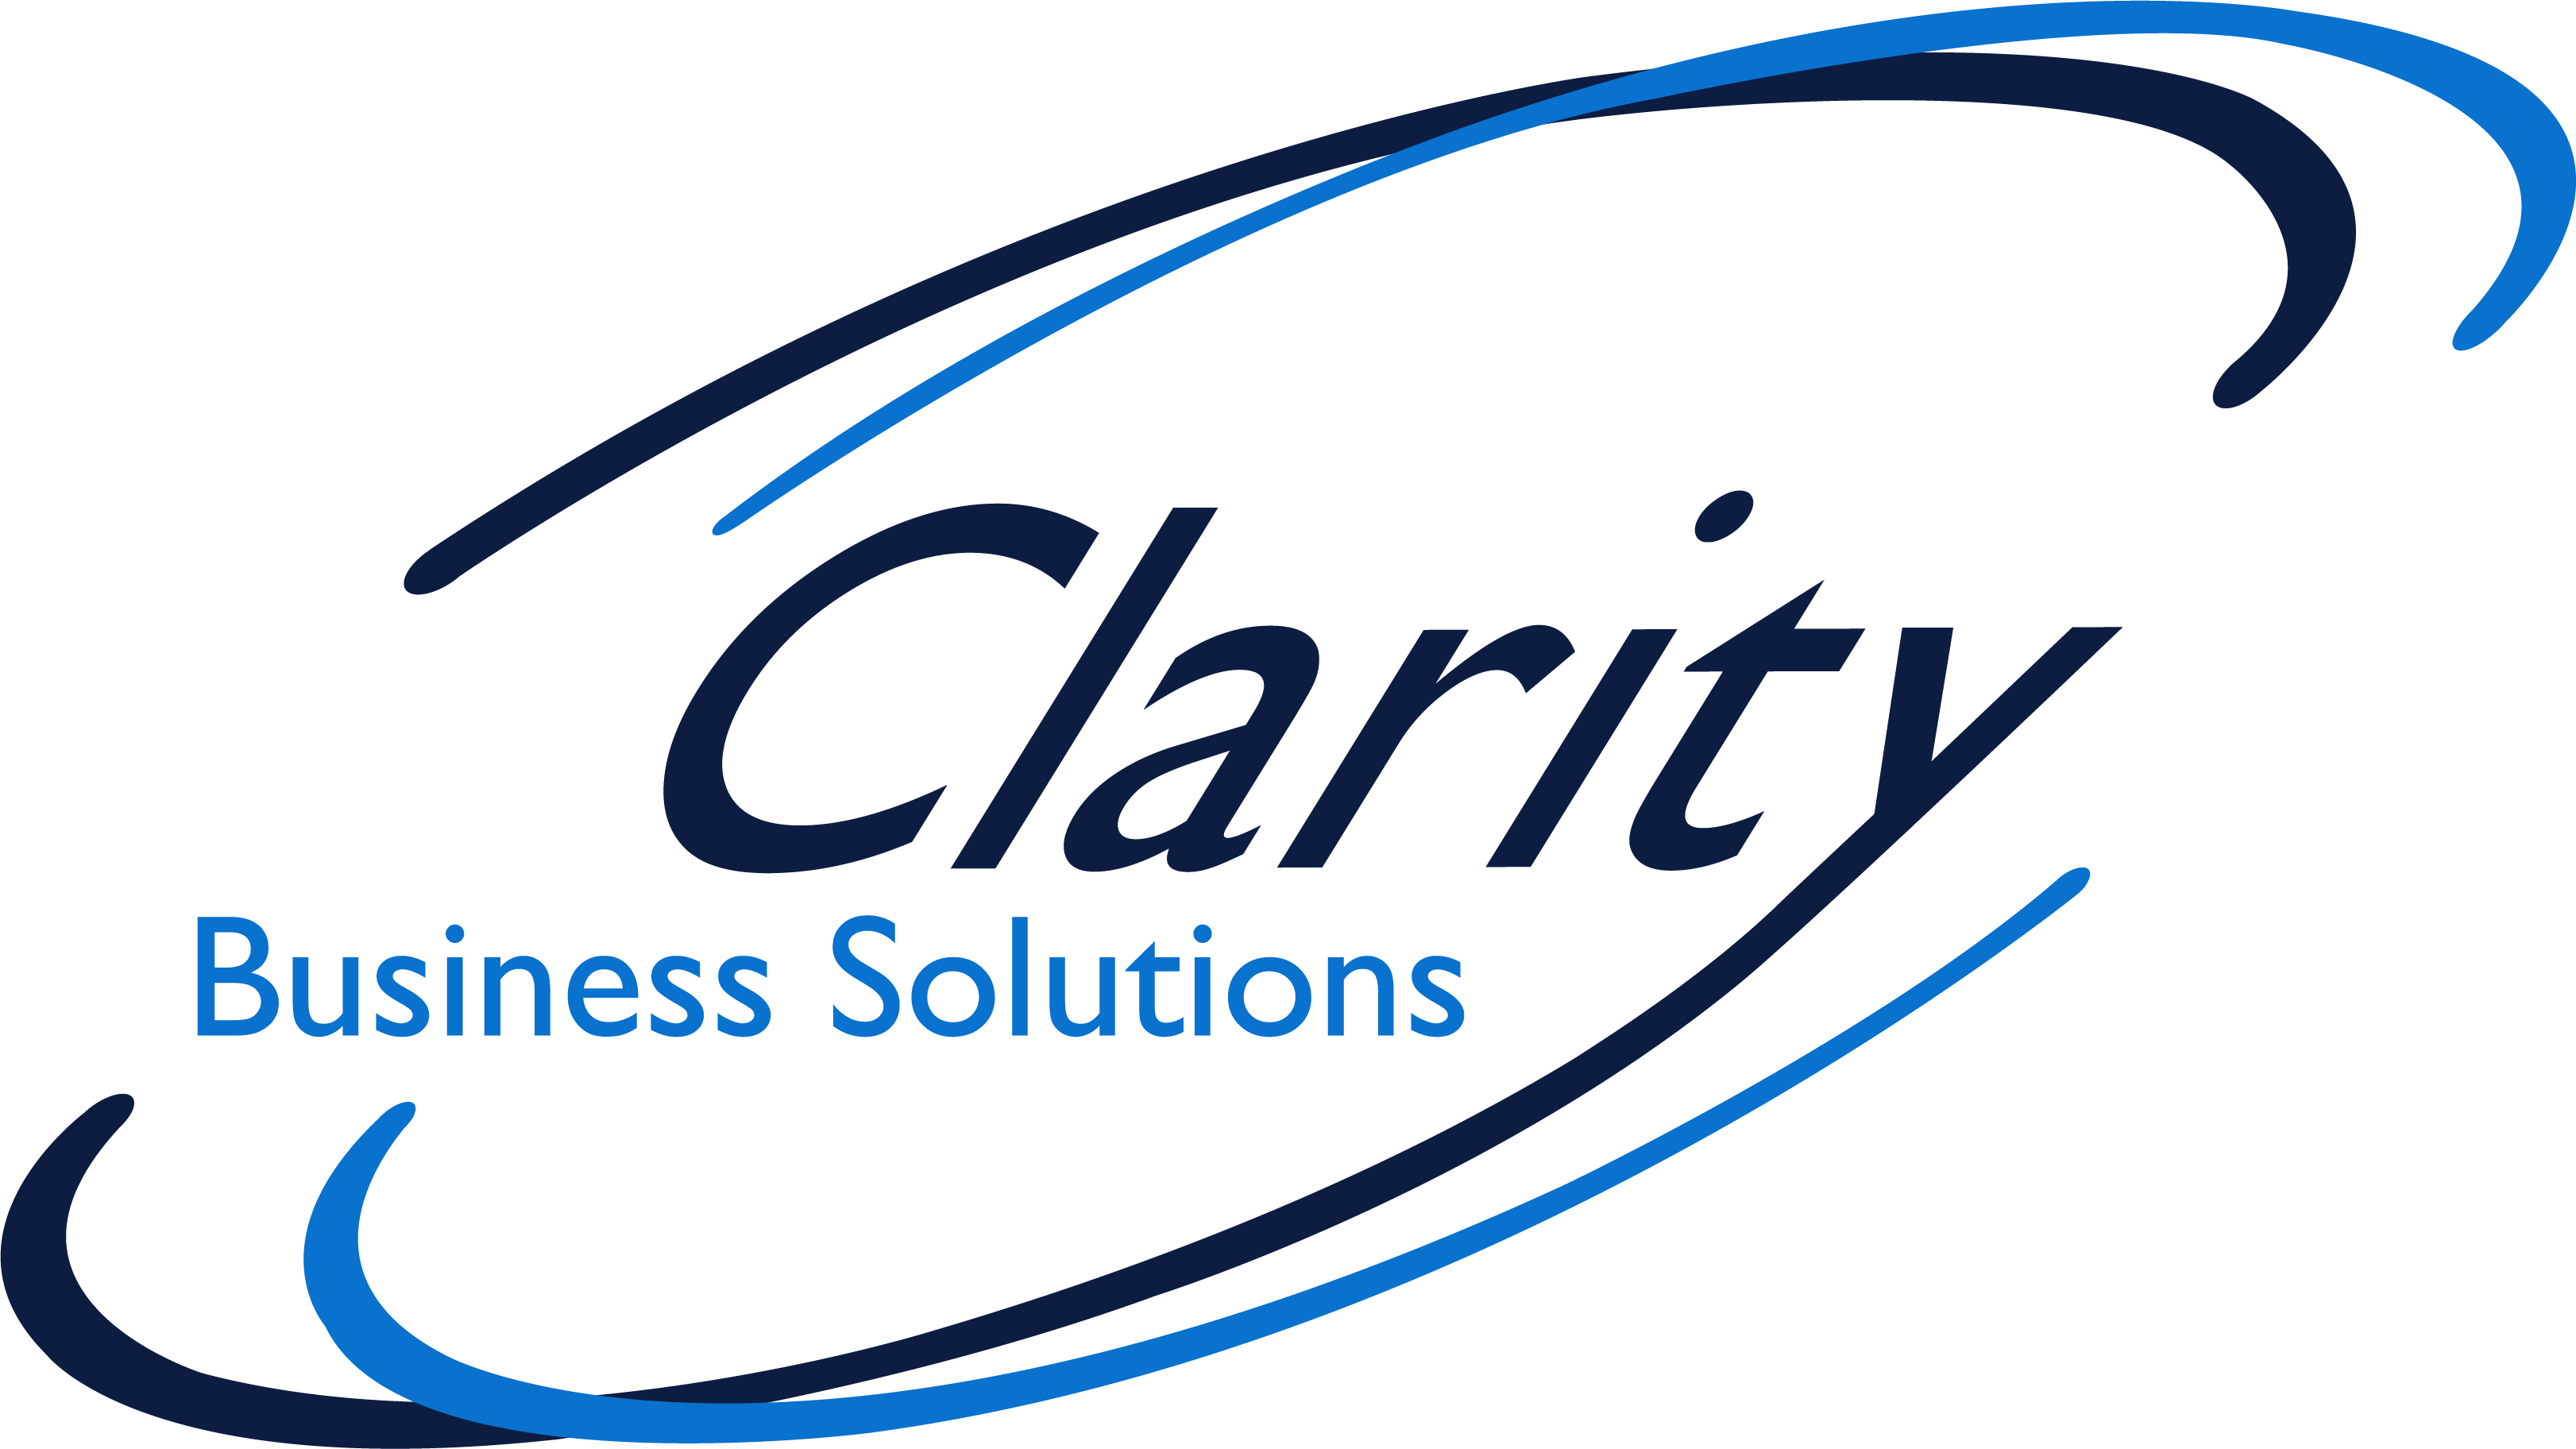 Clarity Business Solutions Inc. provides top quality Software Engineering and Technical Management solutions for our clients.